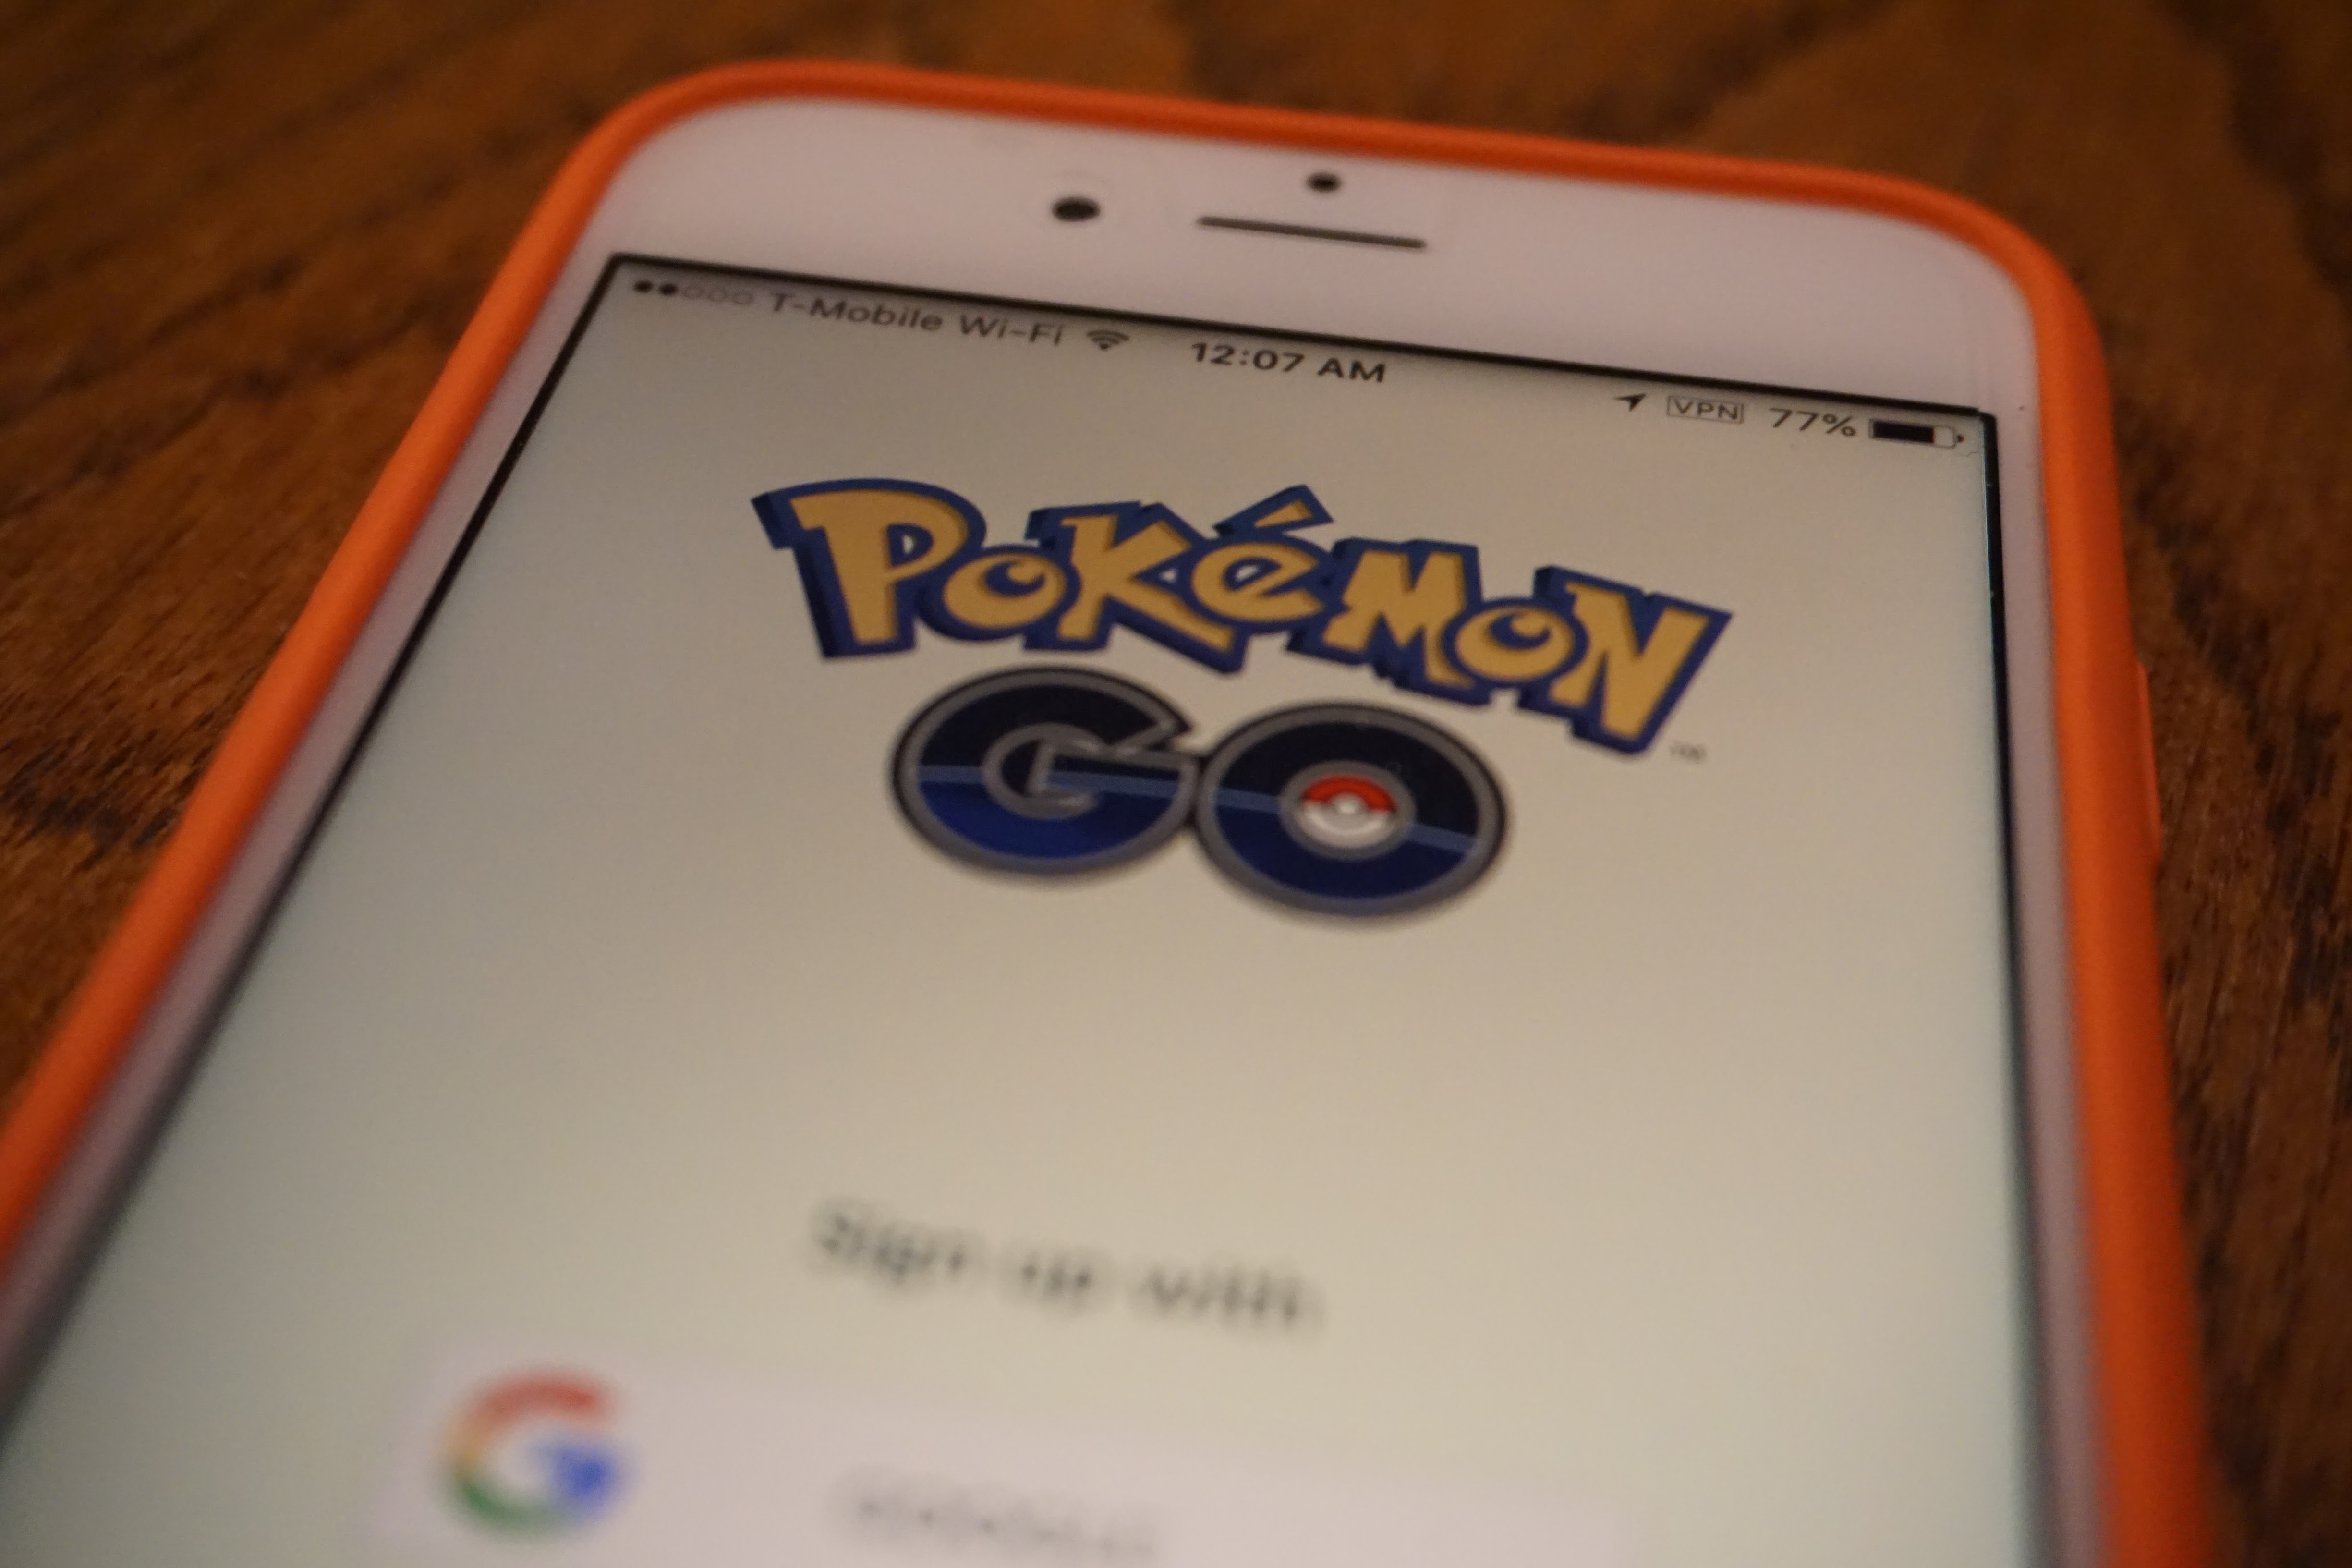 How To Recover Pokemon Go Account Without Phone Number and Email